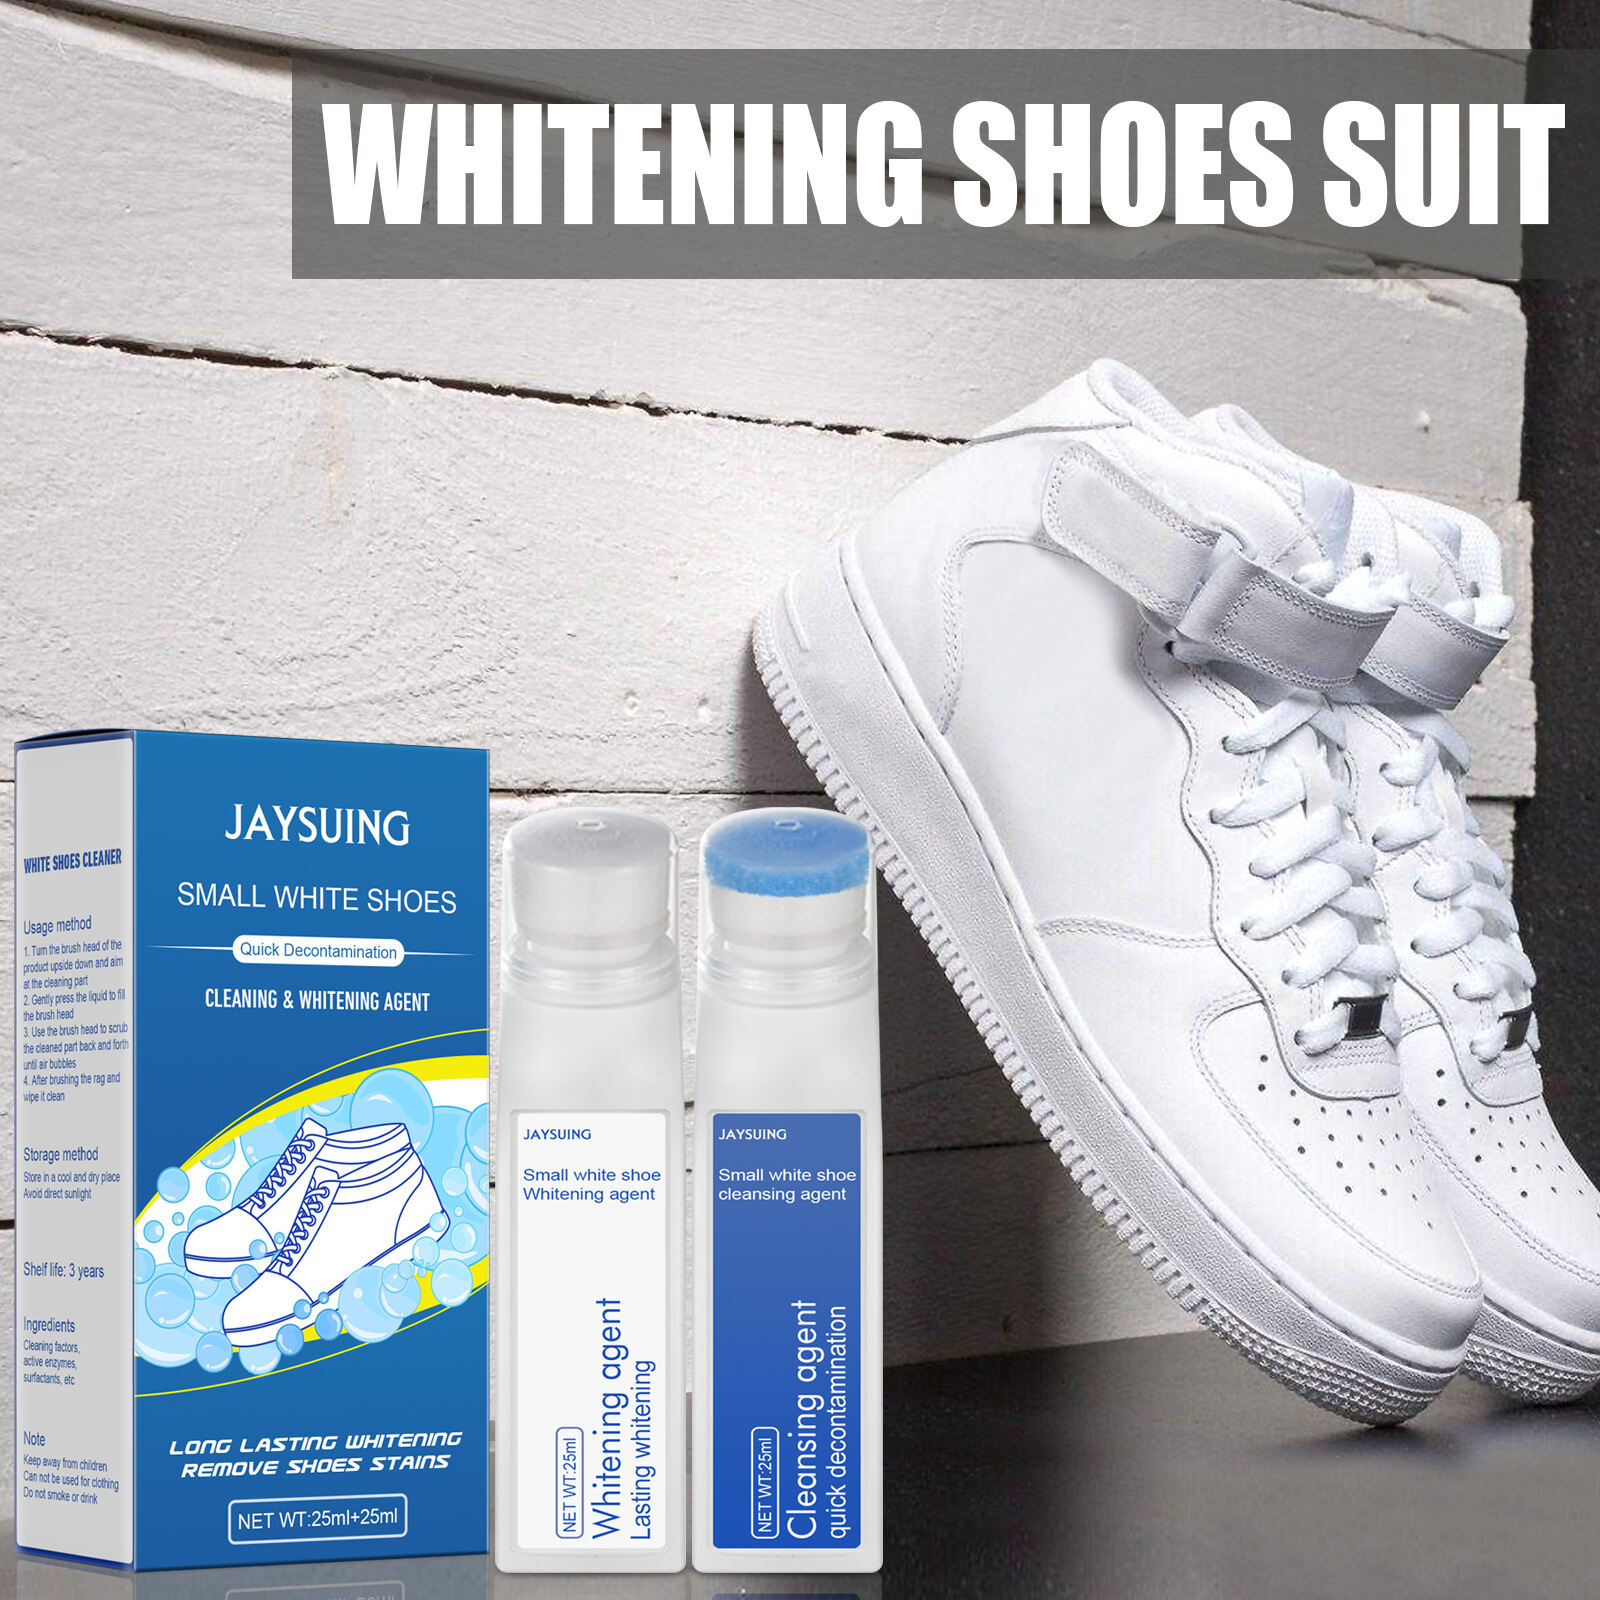 Jaysuing Small White Shoe Cleaner One Wipe Is White Shoe Whitening Agent  Decontamination Bright White Edge Shoe Shine Free With Water